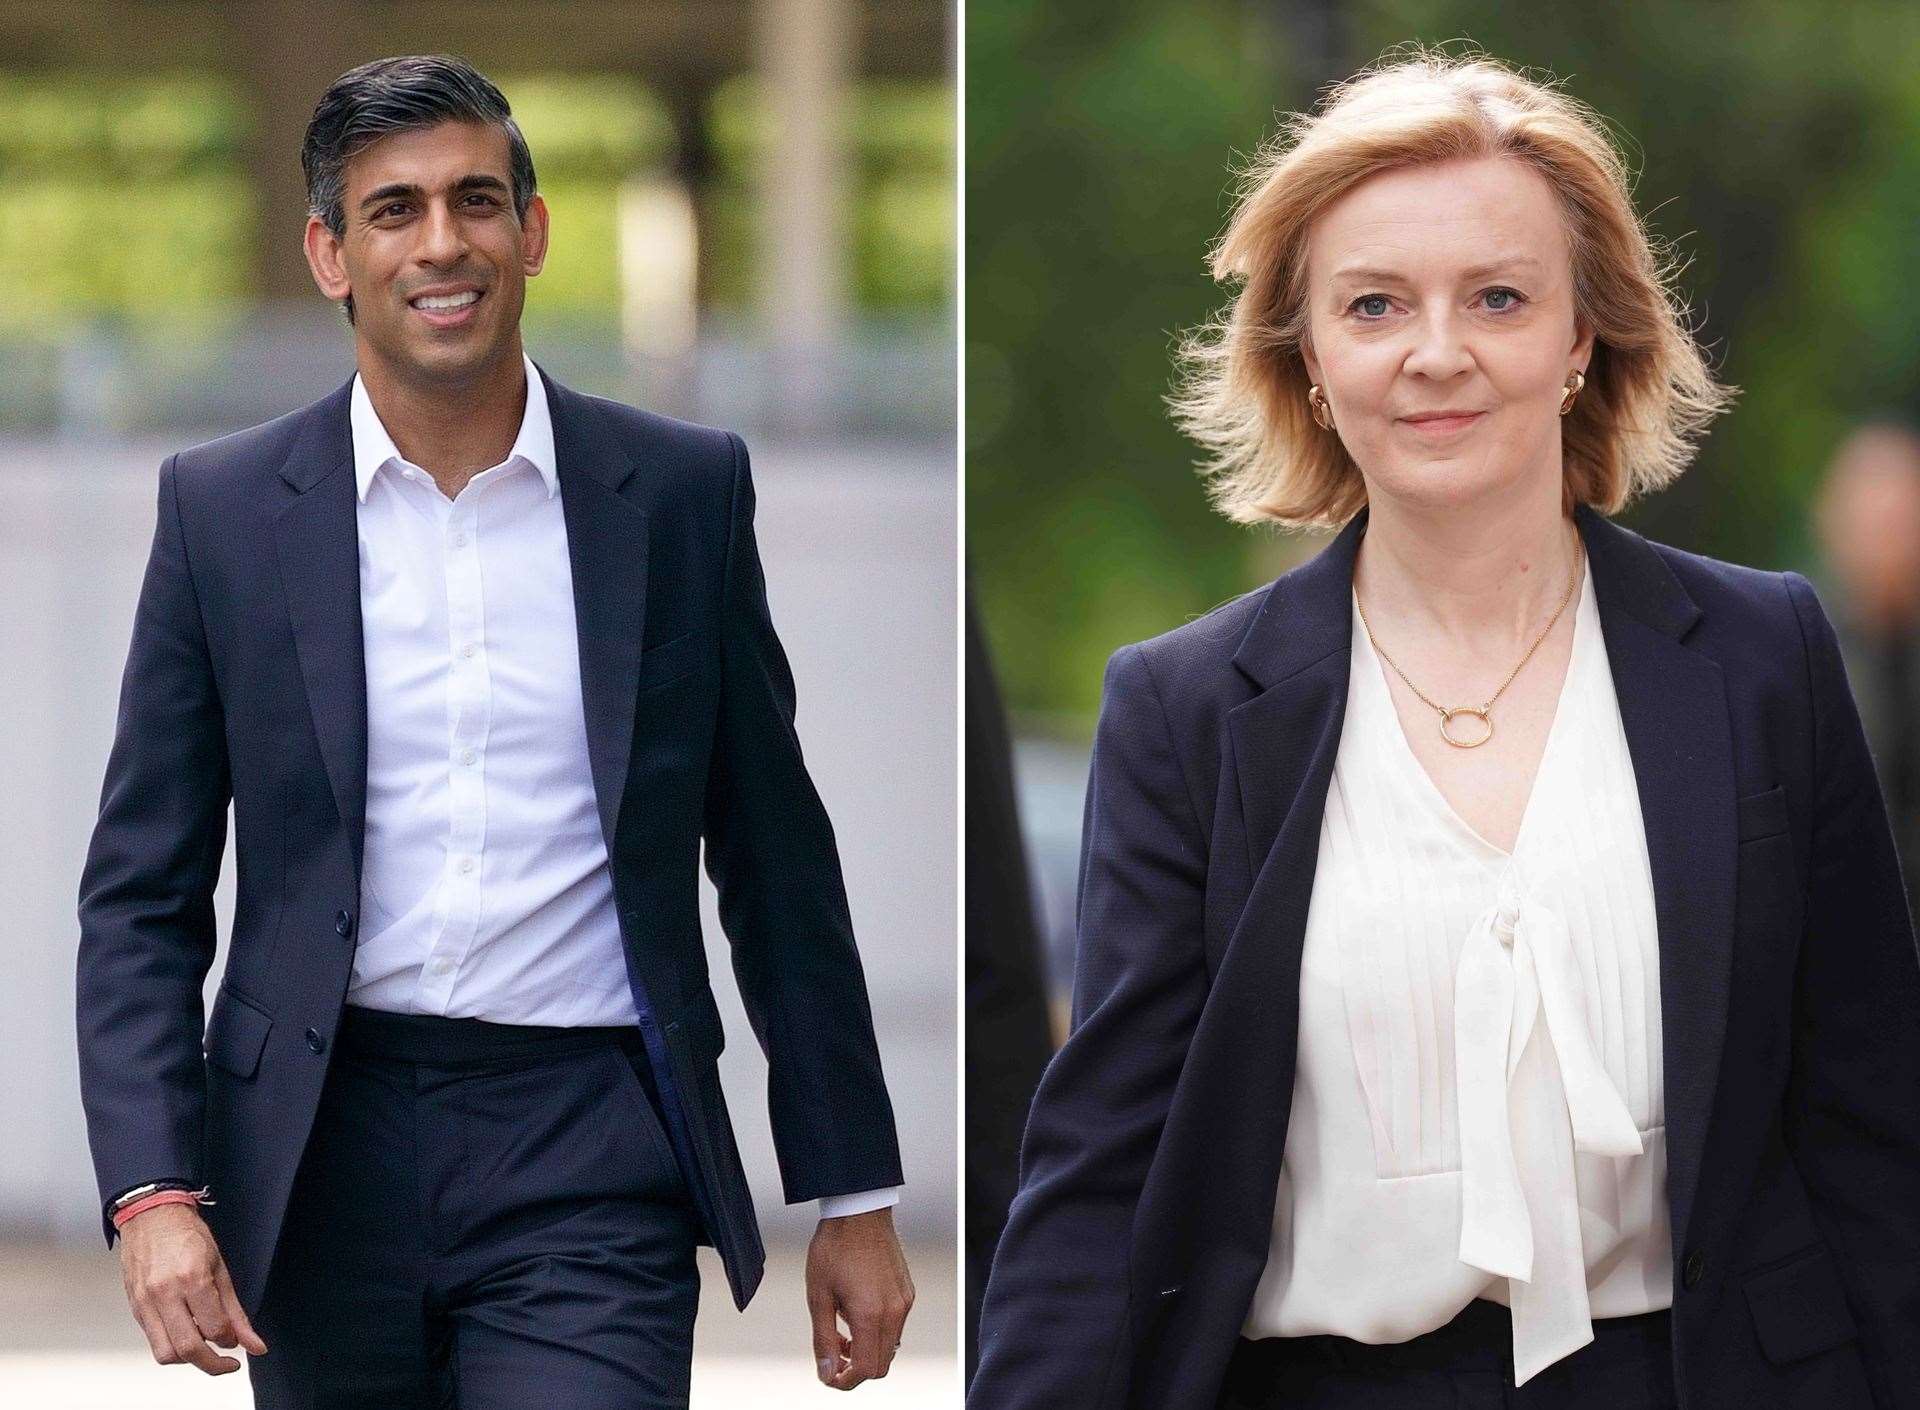 The Resolution Foundation said neither Rishi Sunak nor Liz Truss’s proposals were sufficient (PA)